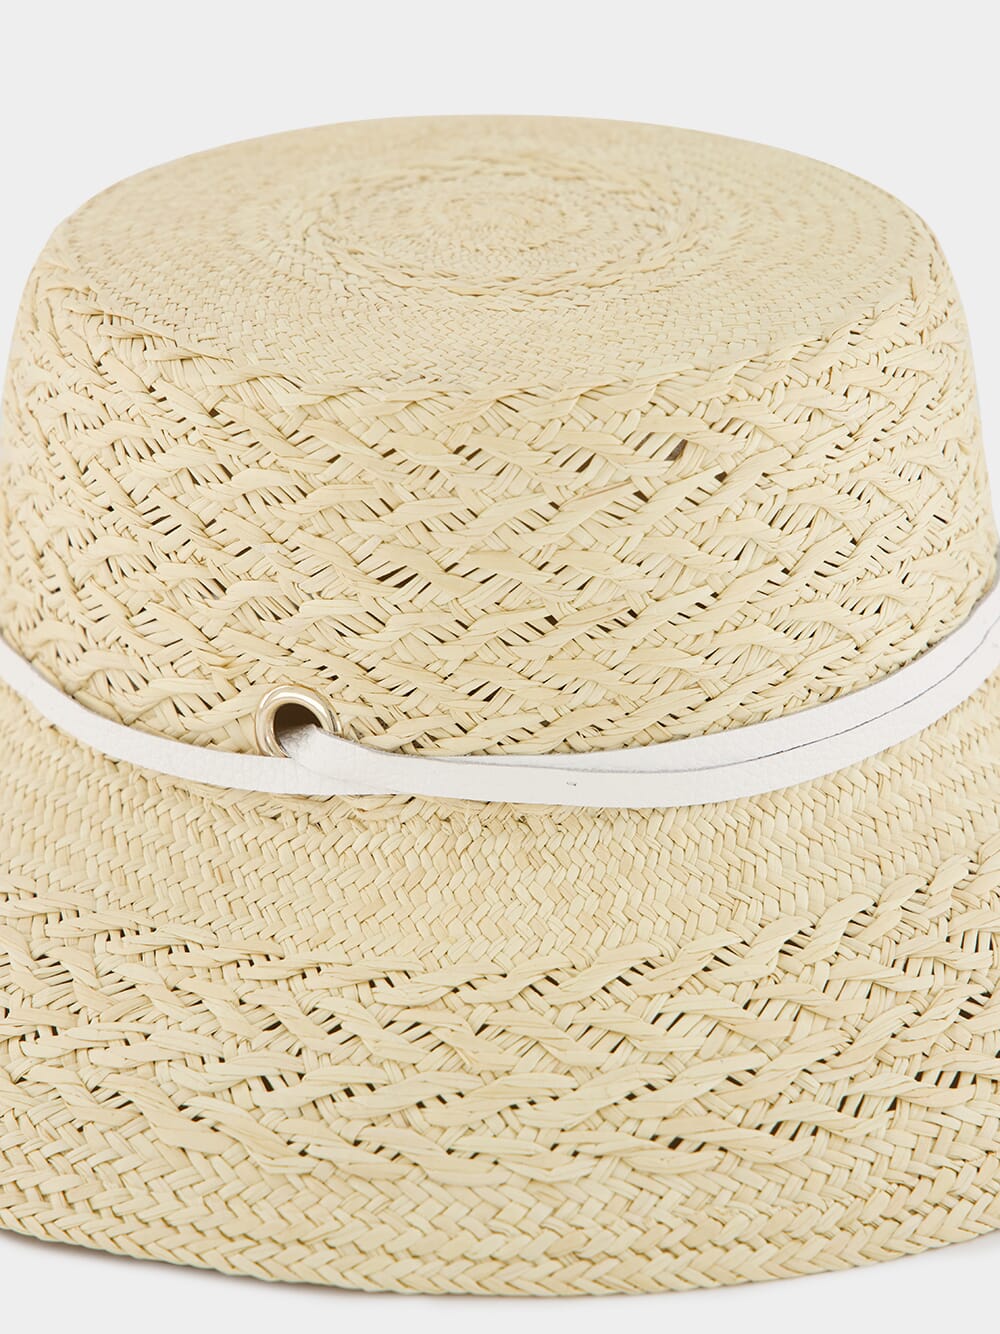 Texturized Straw Lampshade Hat with Leather Band